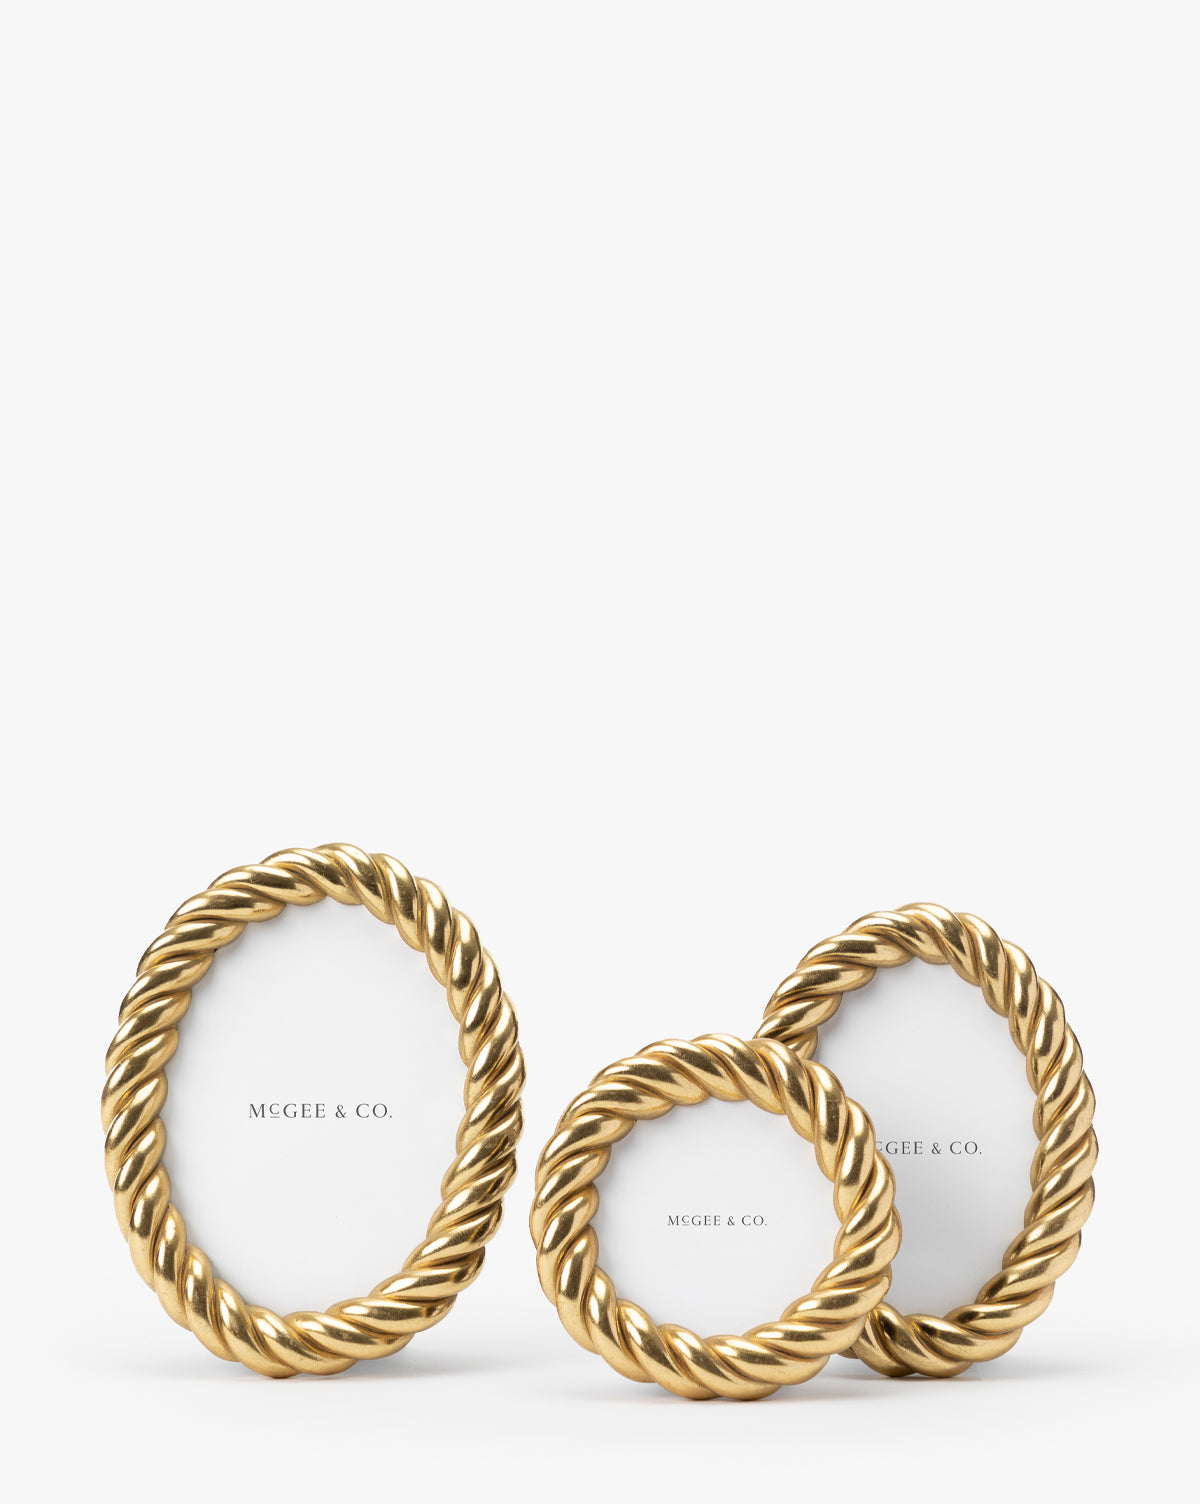 Gilded Rope Frame – McGee & Co.